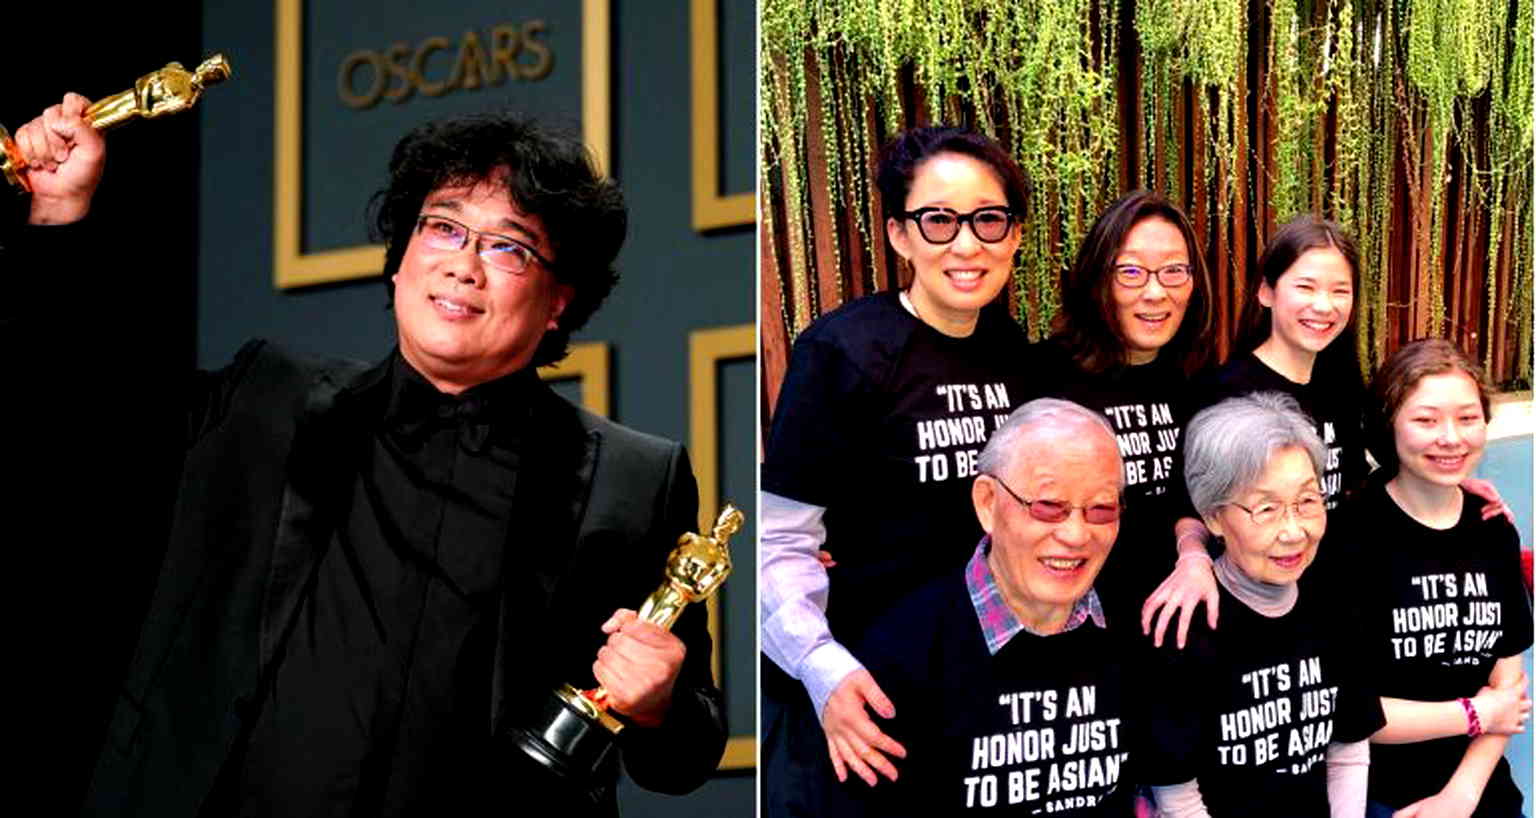 No Matter How Bad it Gets, It Will ALWAYS Be ‘an Honor Just to be Asian’